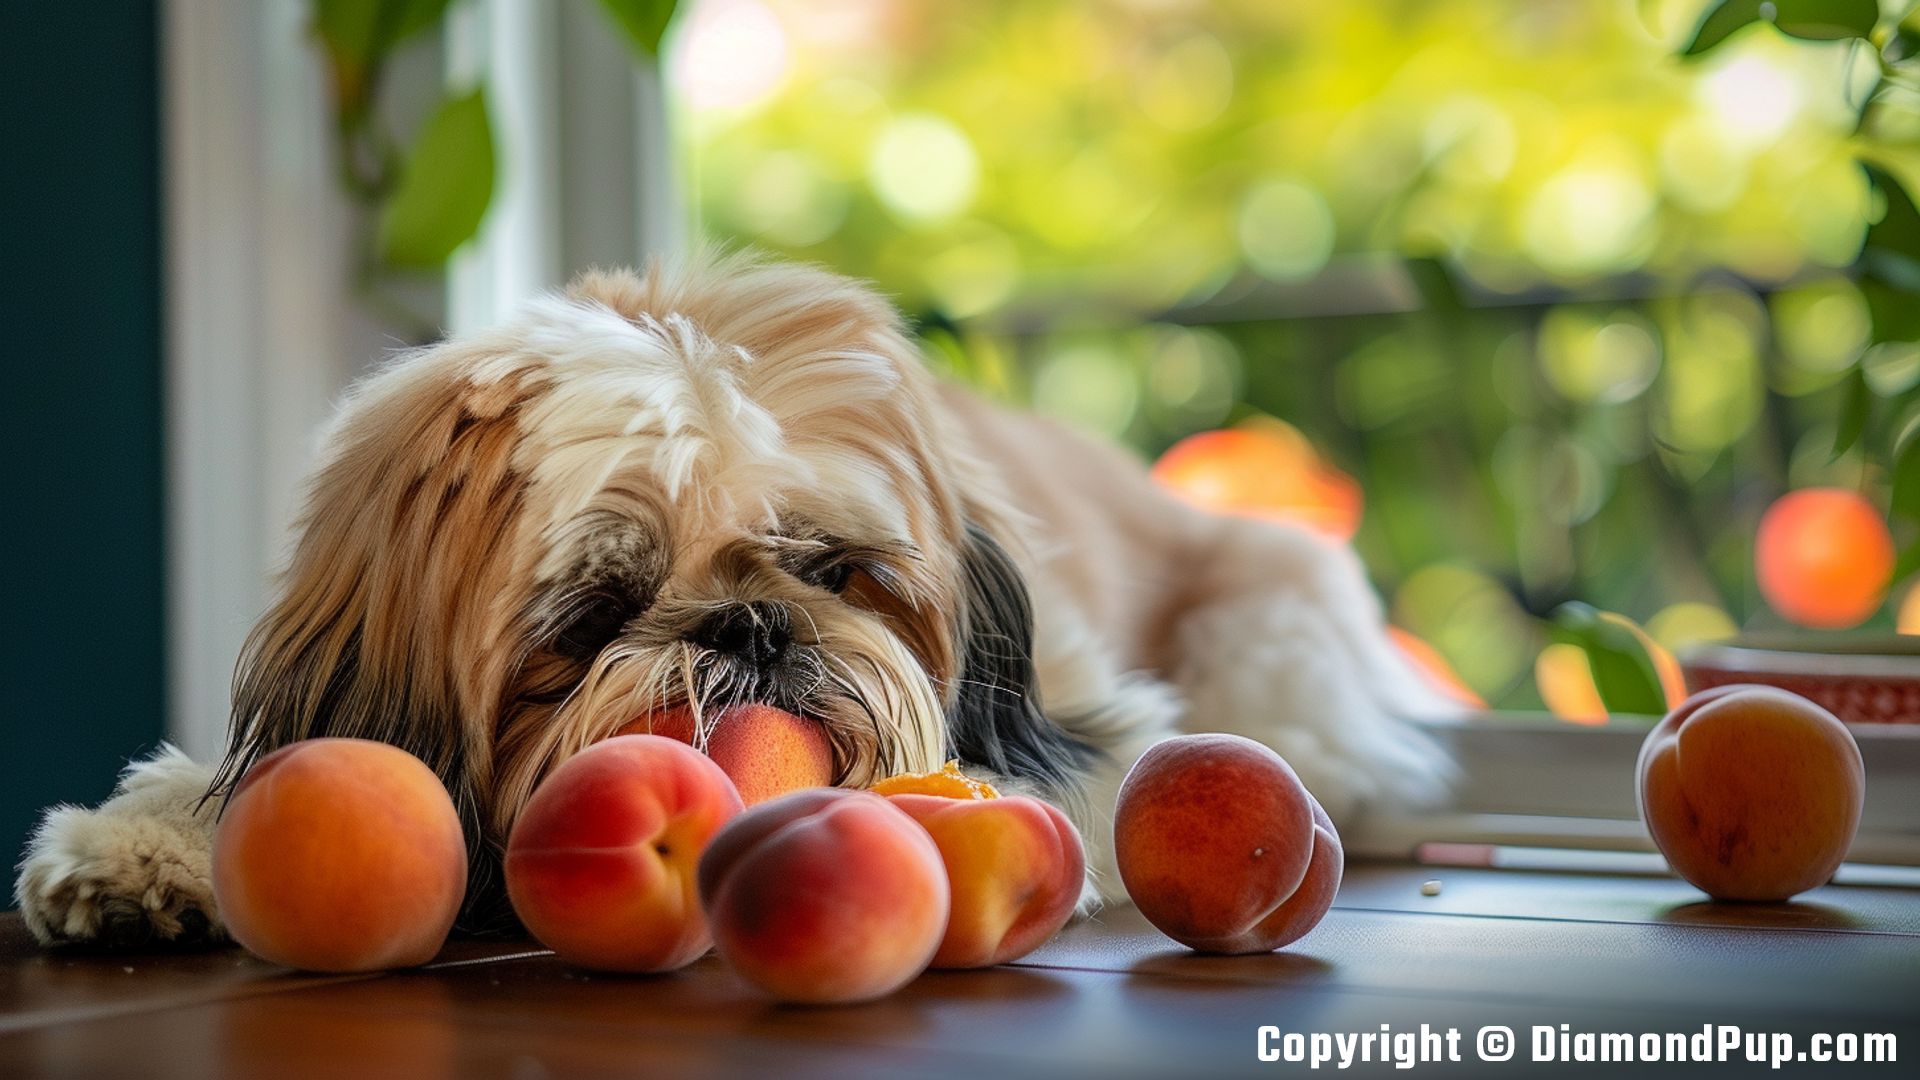 Image of Shih Tzu Snacking on Peaches